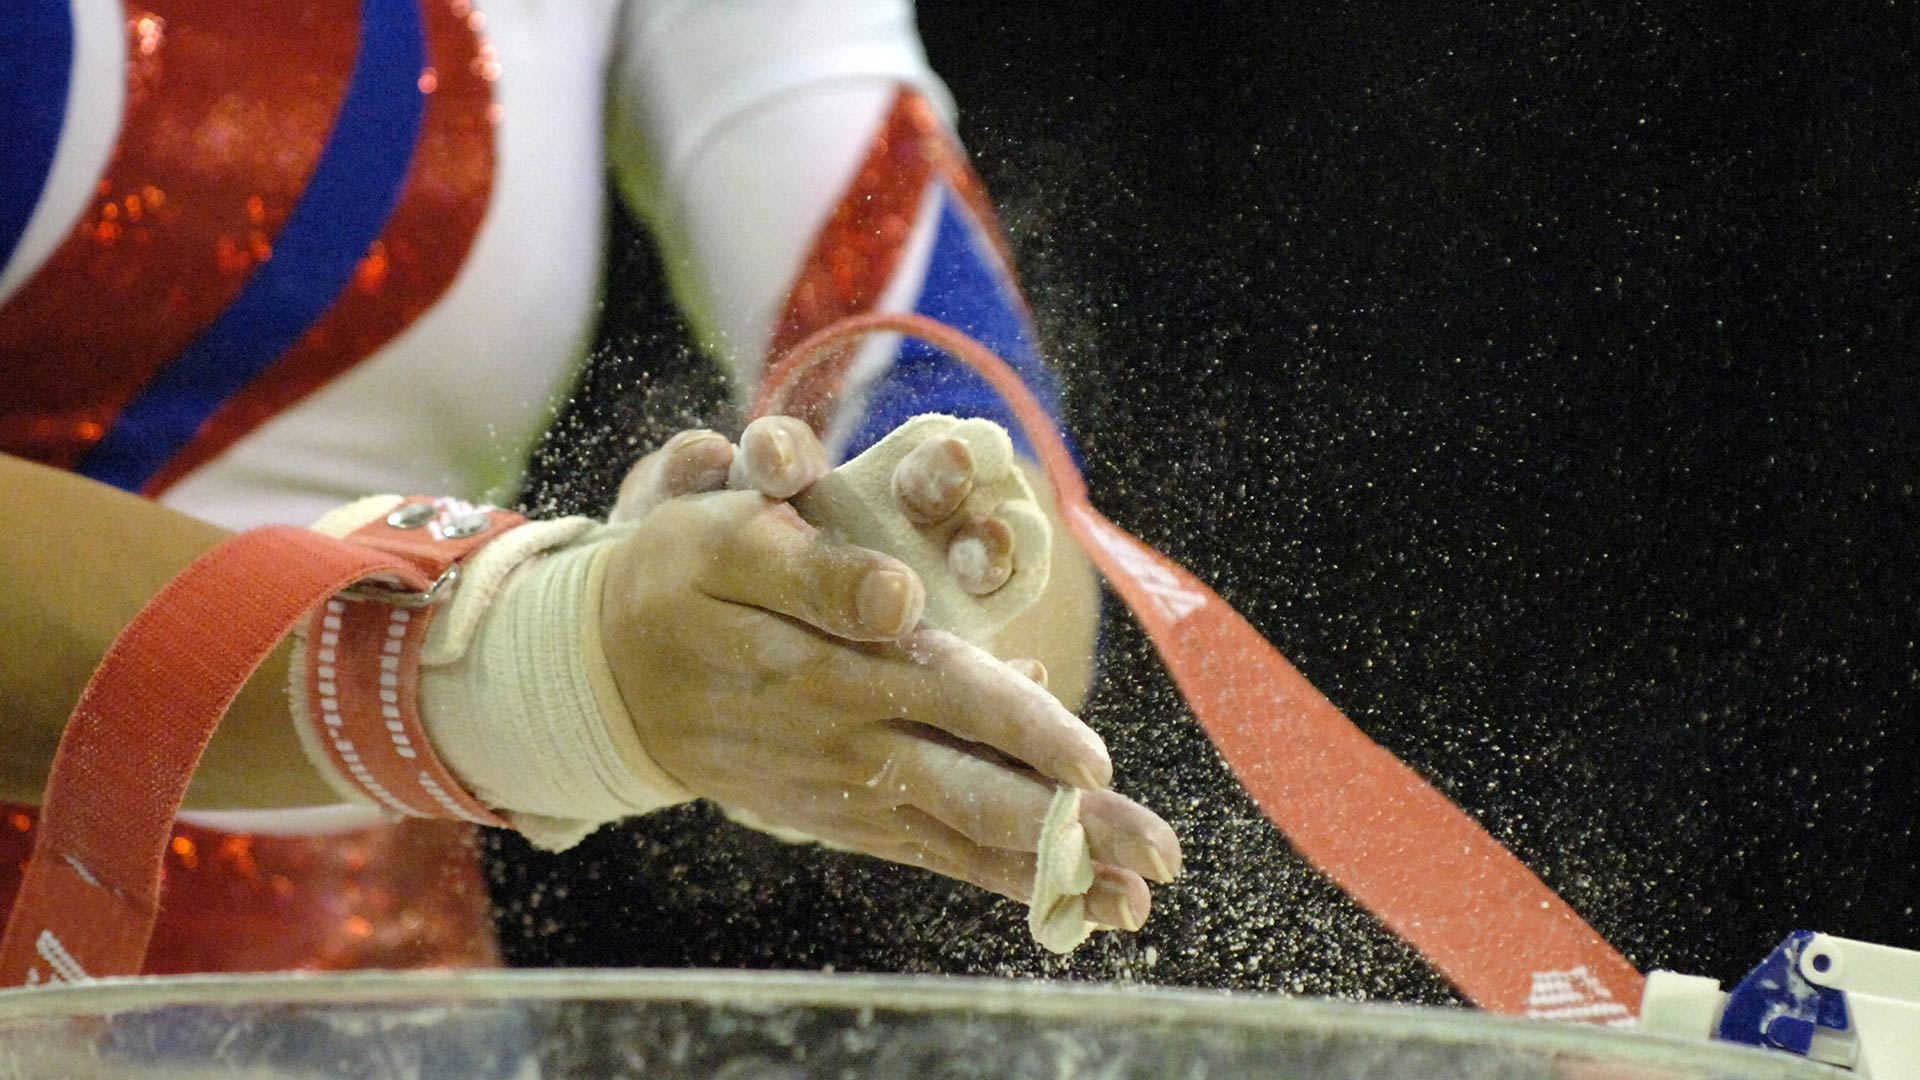  A gymnast chalking her hands